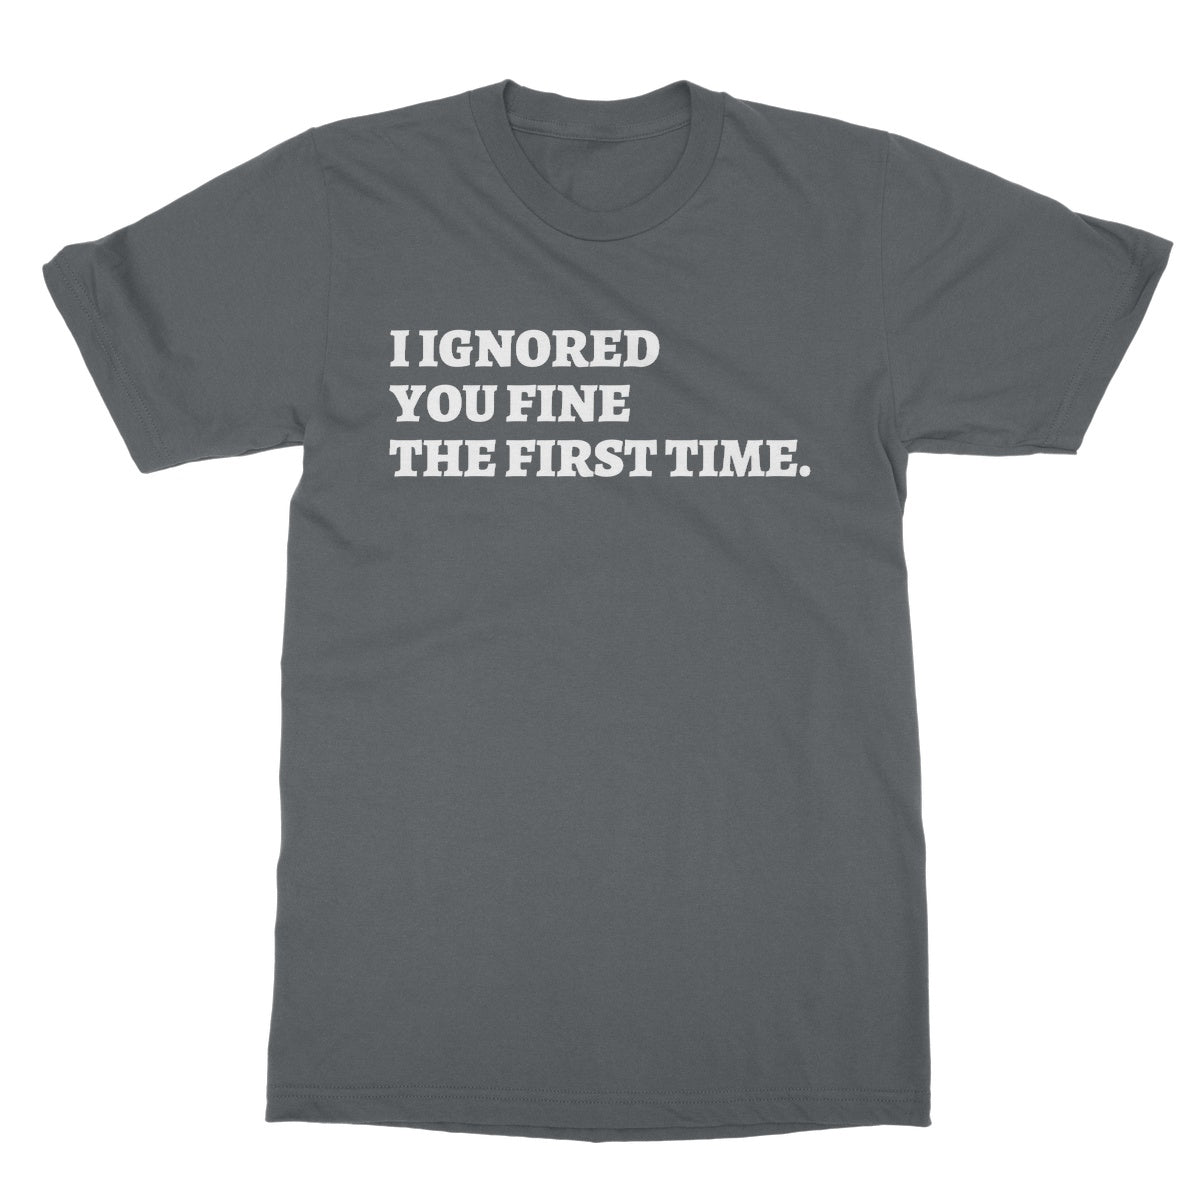 I ignored you fine the first time t shirt grey